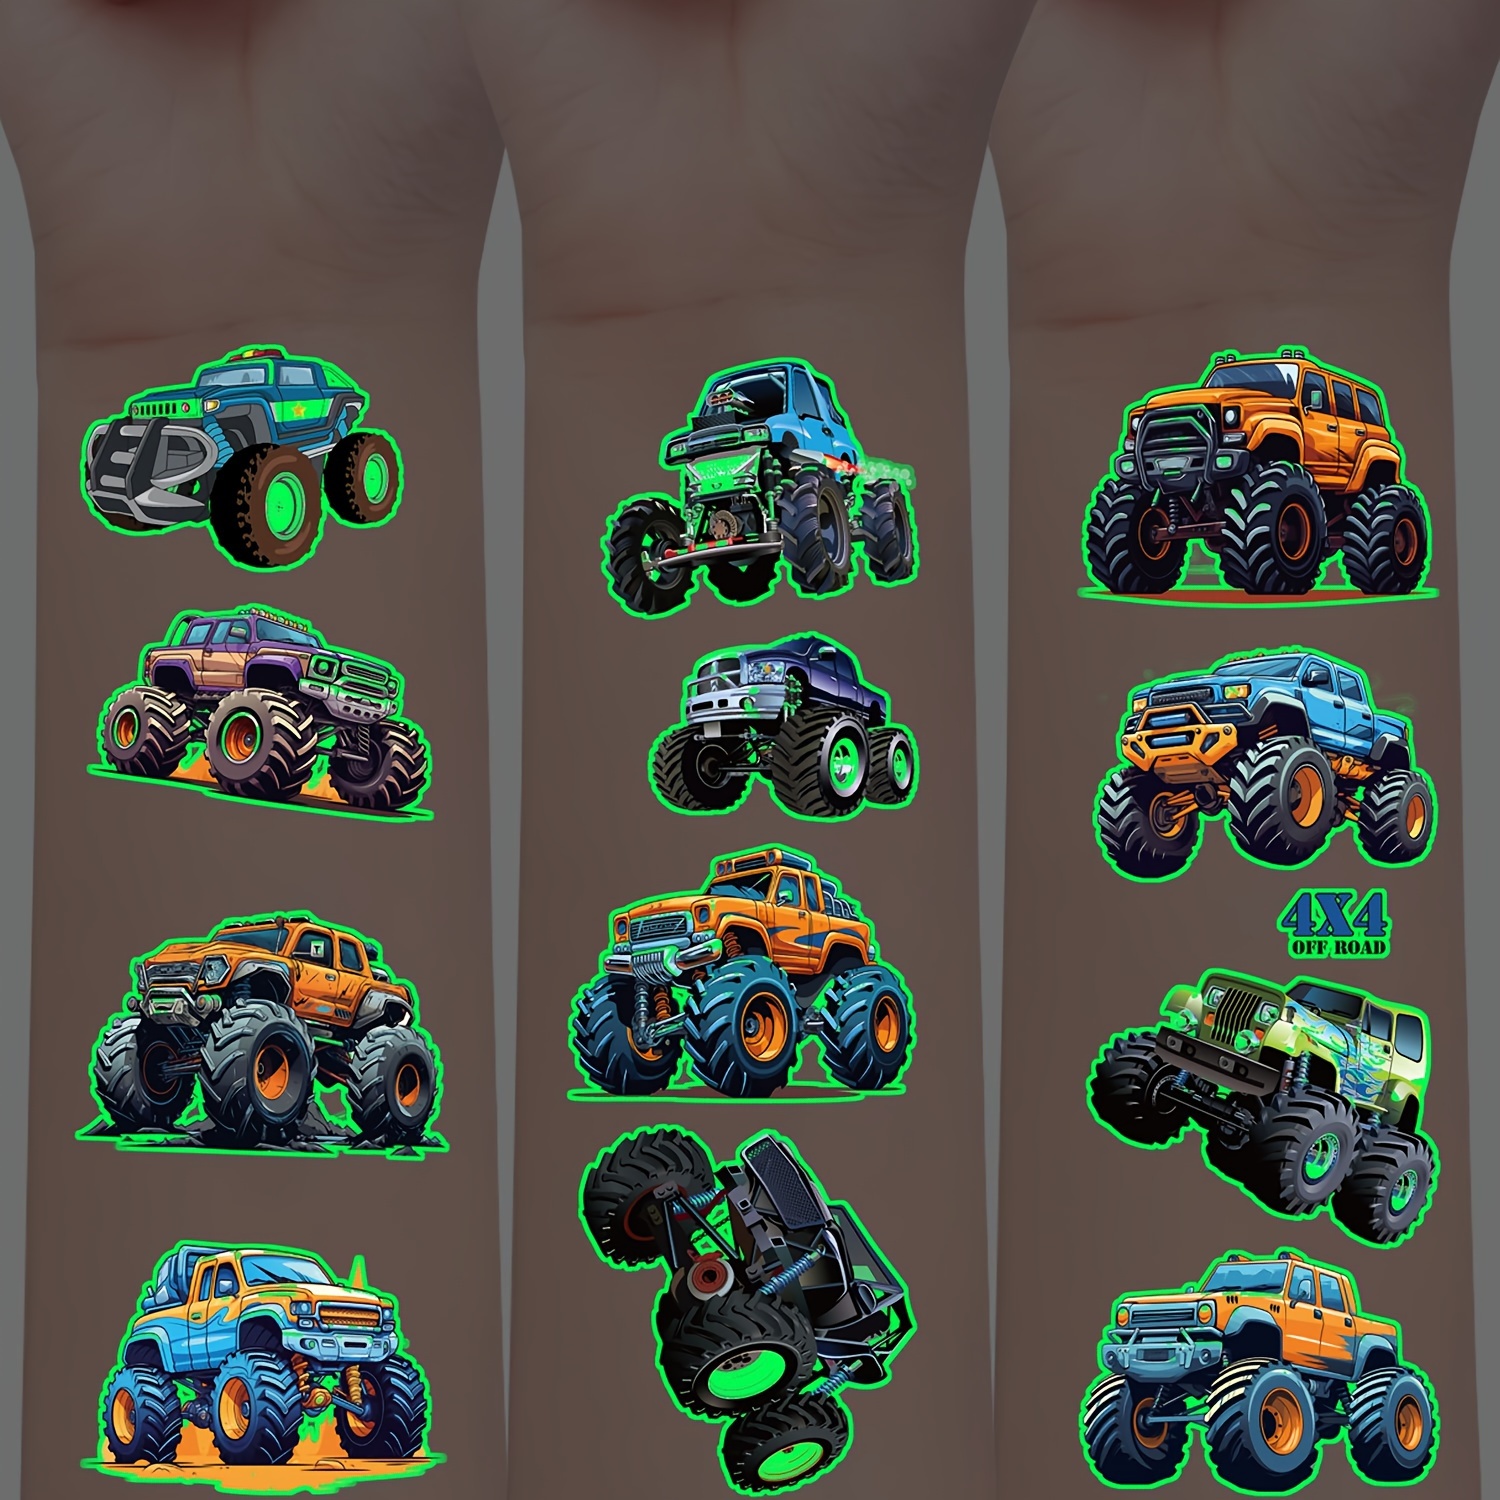 

10 Pack Of Glow-in-the-dark Monster Truck Temporary Tattoos - Waterproof, Durable, And Artistic Body Decals For Fun